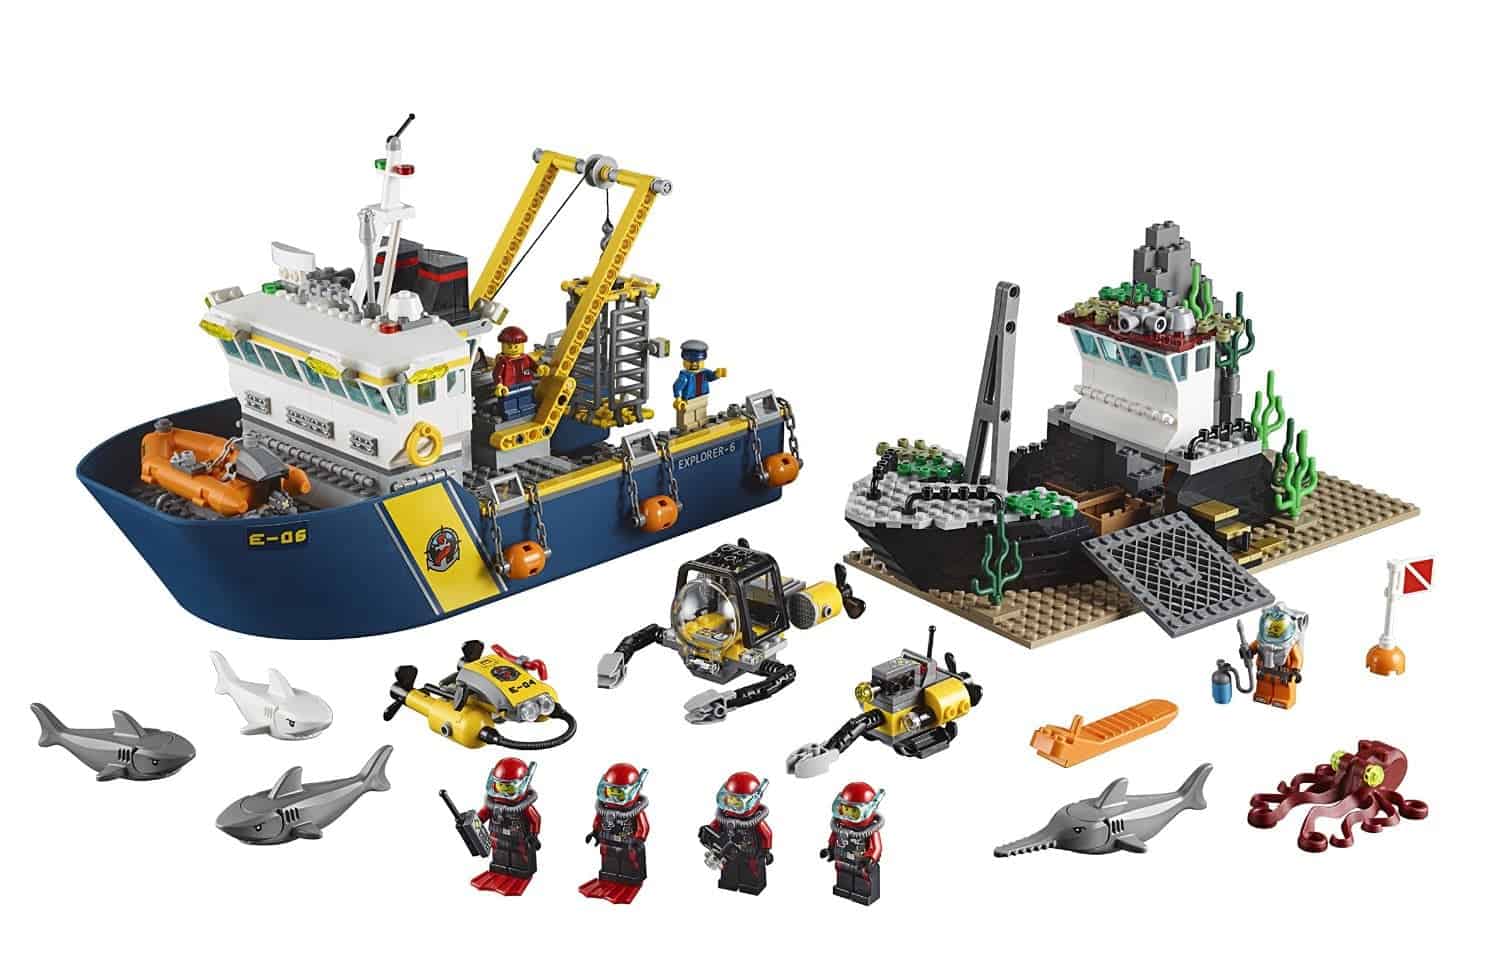 Lego Gift Ideas by Age - Toddler to Twelve Years: Deep Sea Exploration | www.thepinningmama.com